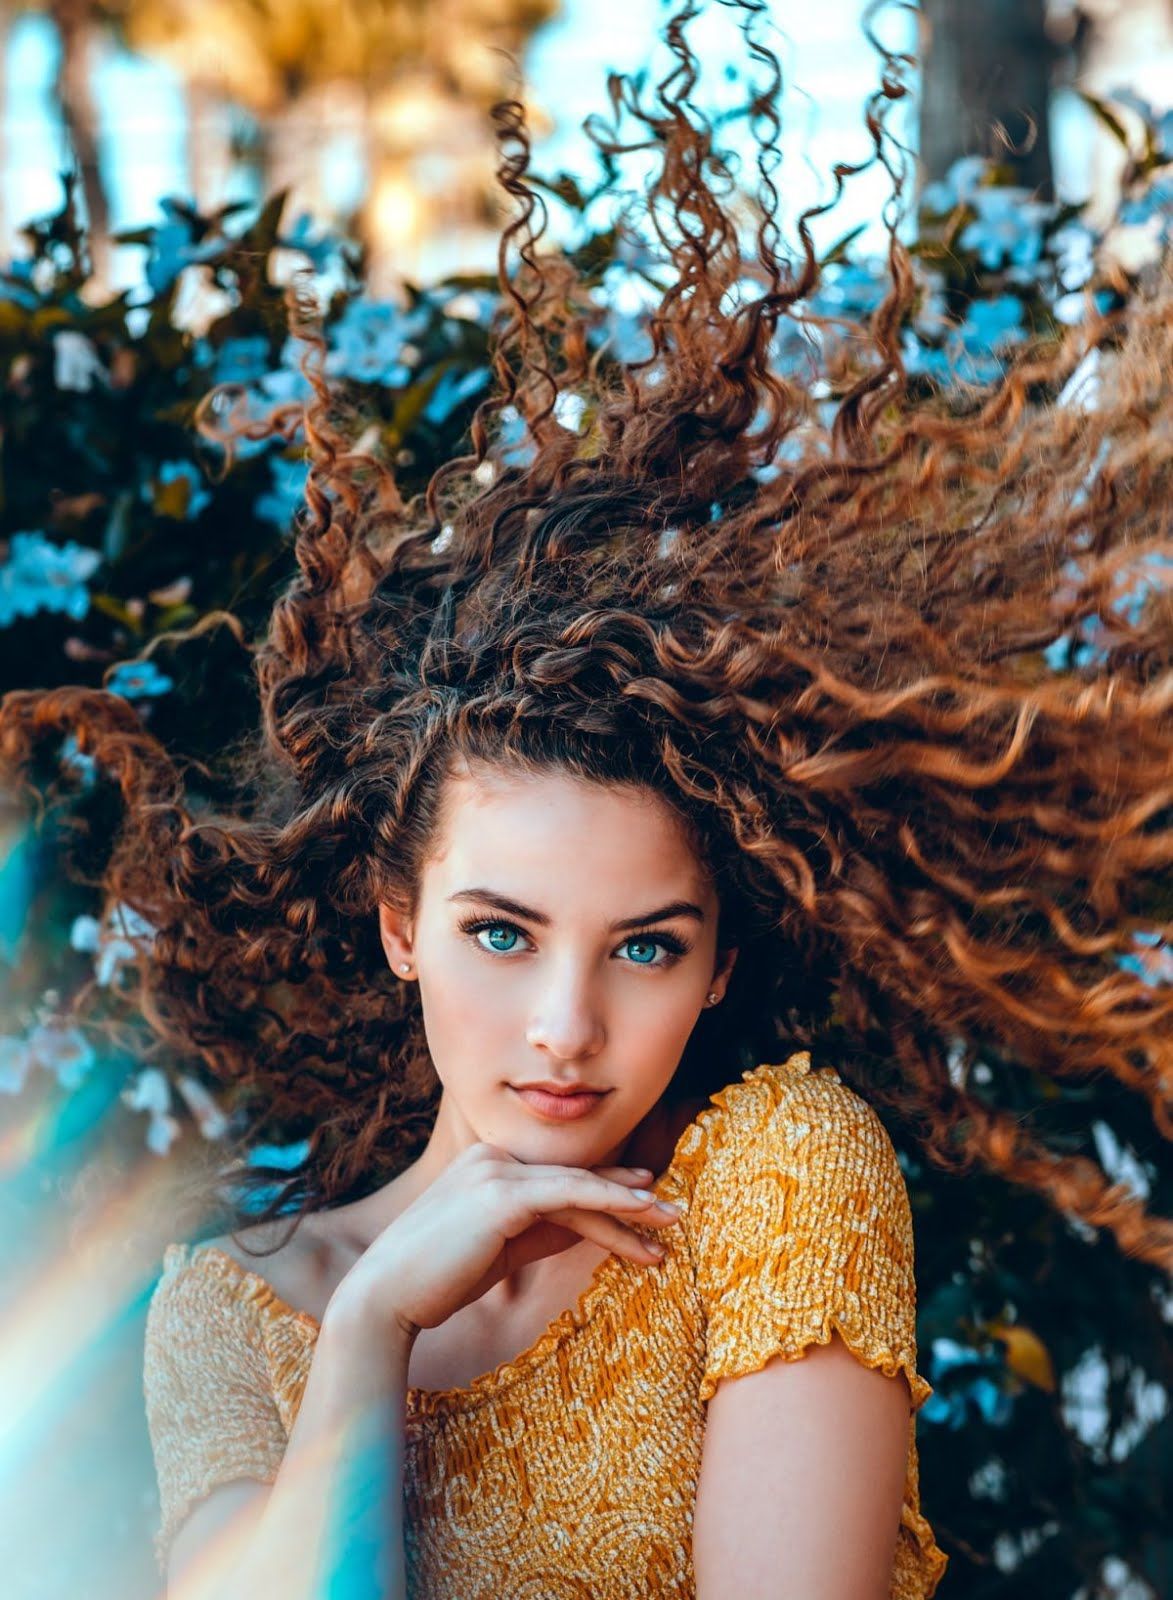 Wallpaper, women, model, redhead, long hair, Sofie Dossi, curly hair, face, portrait display, blue eyes, yellow tops, depth of field, hands 1173x1600